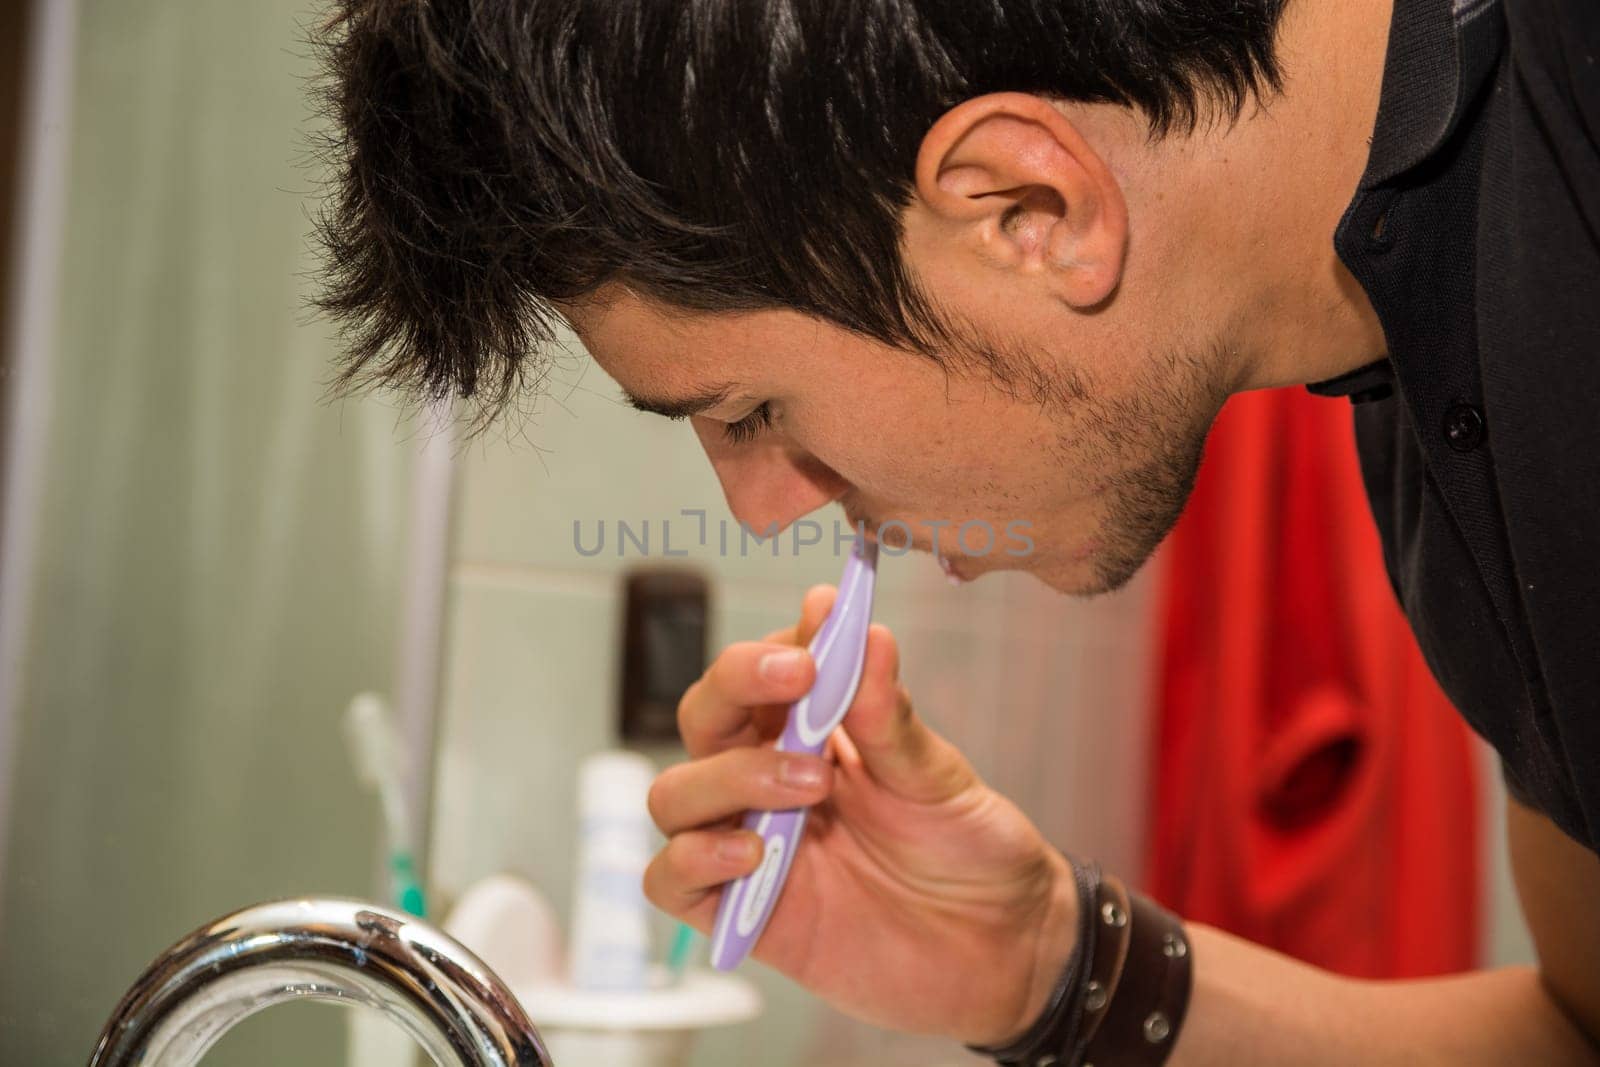 Headshot of attractive young man brushing teeth and cleaning tongue with toothbrush, looking at himself in mirror